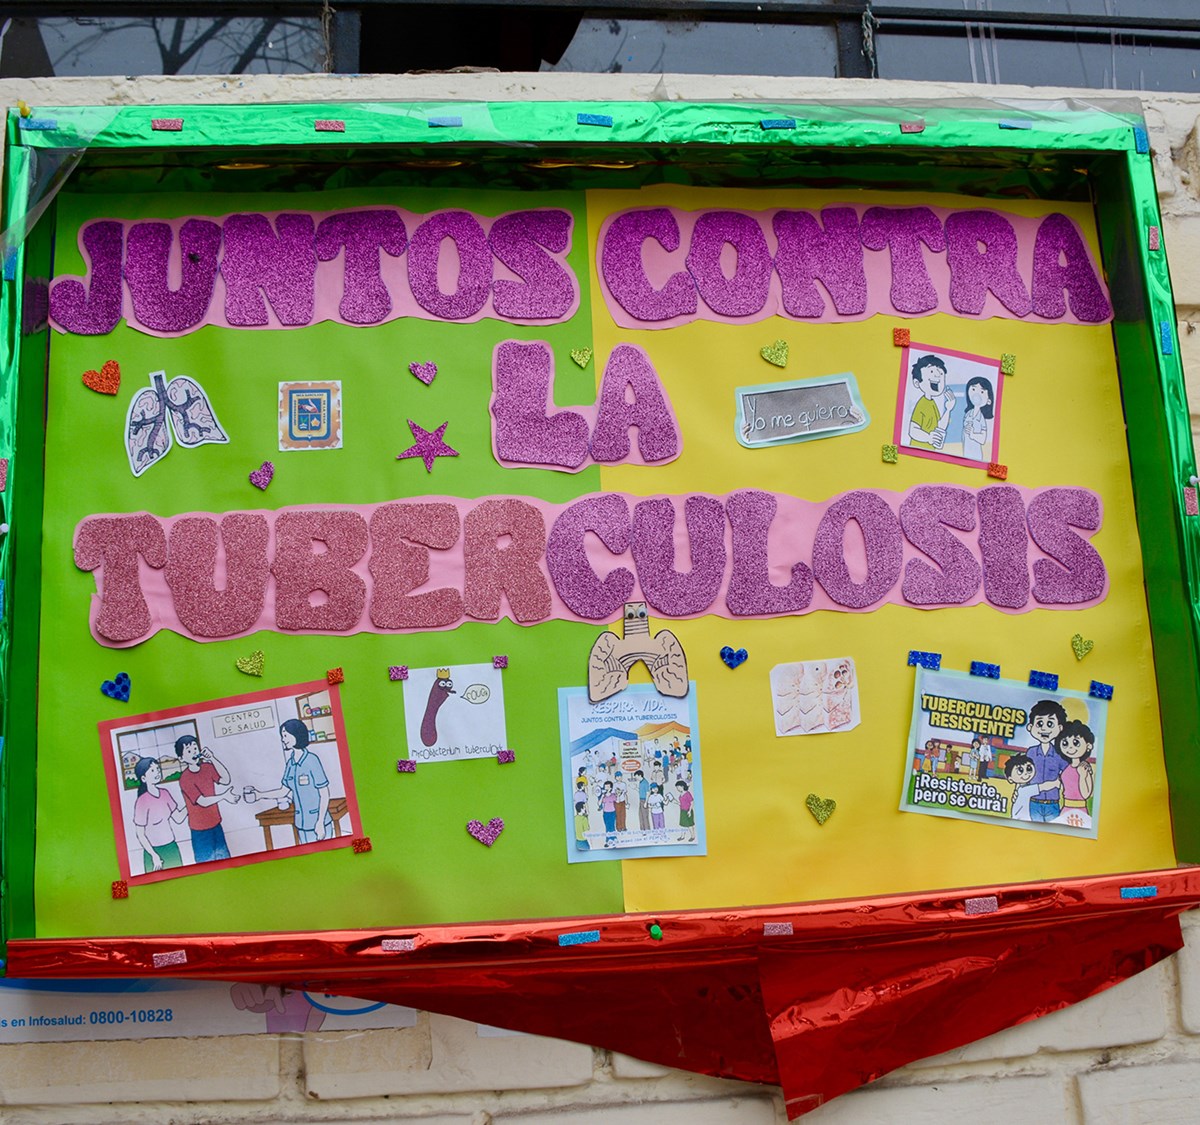 A sign in Spanish reading: Juntos Contra La Tuberculosis (Together Against Tuberculosis).